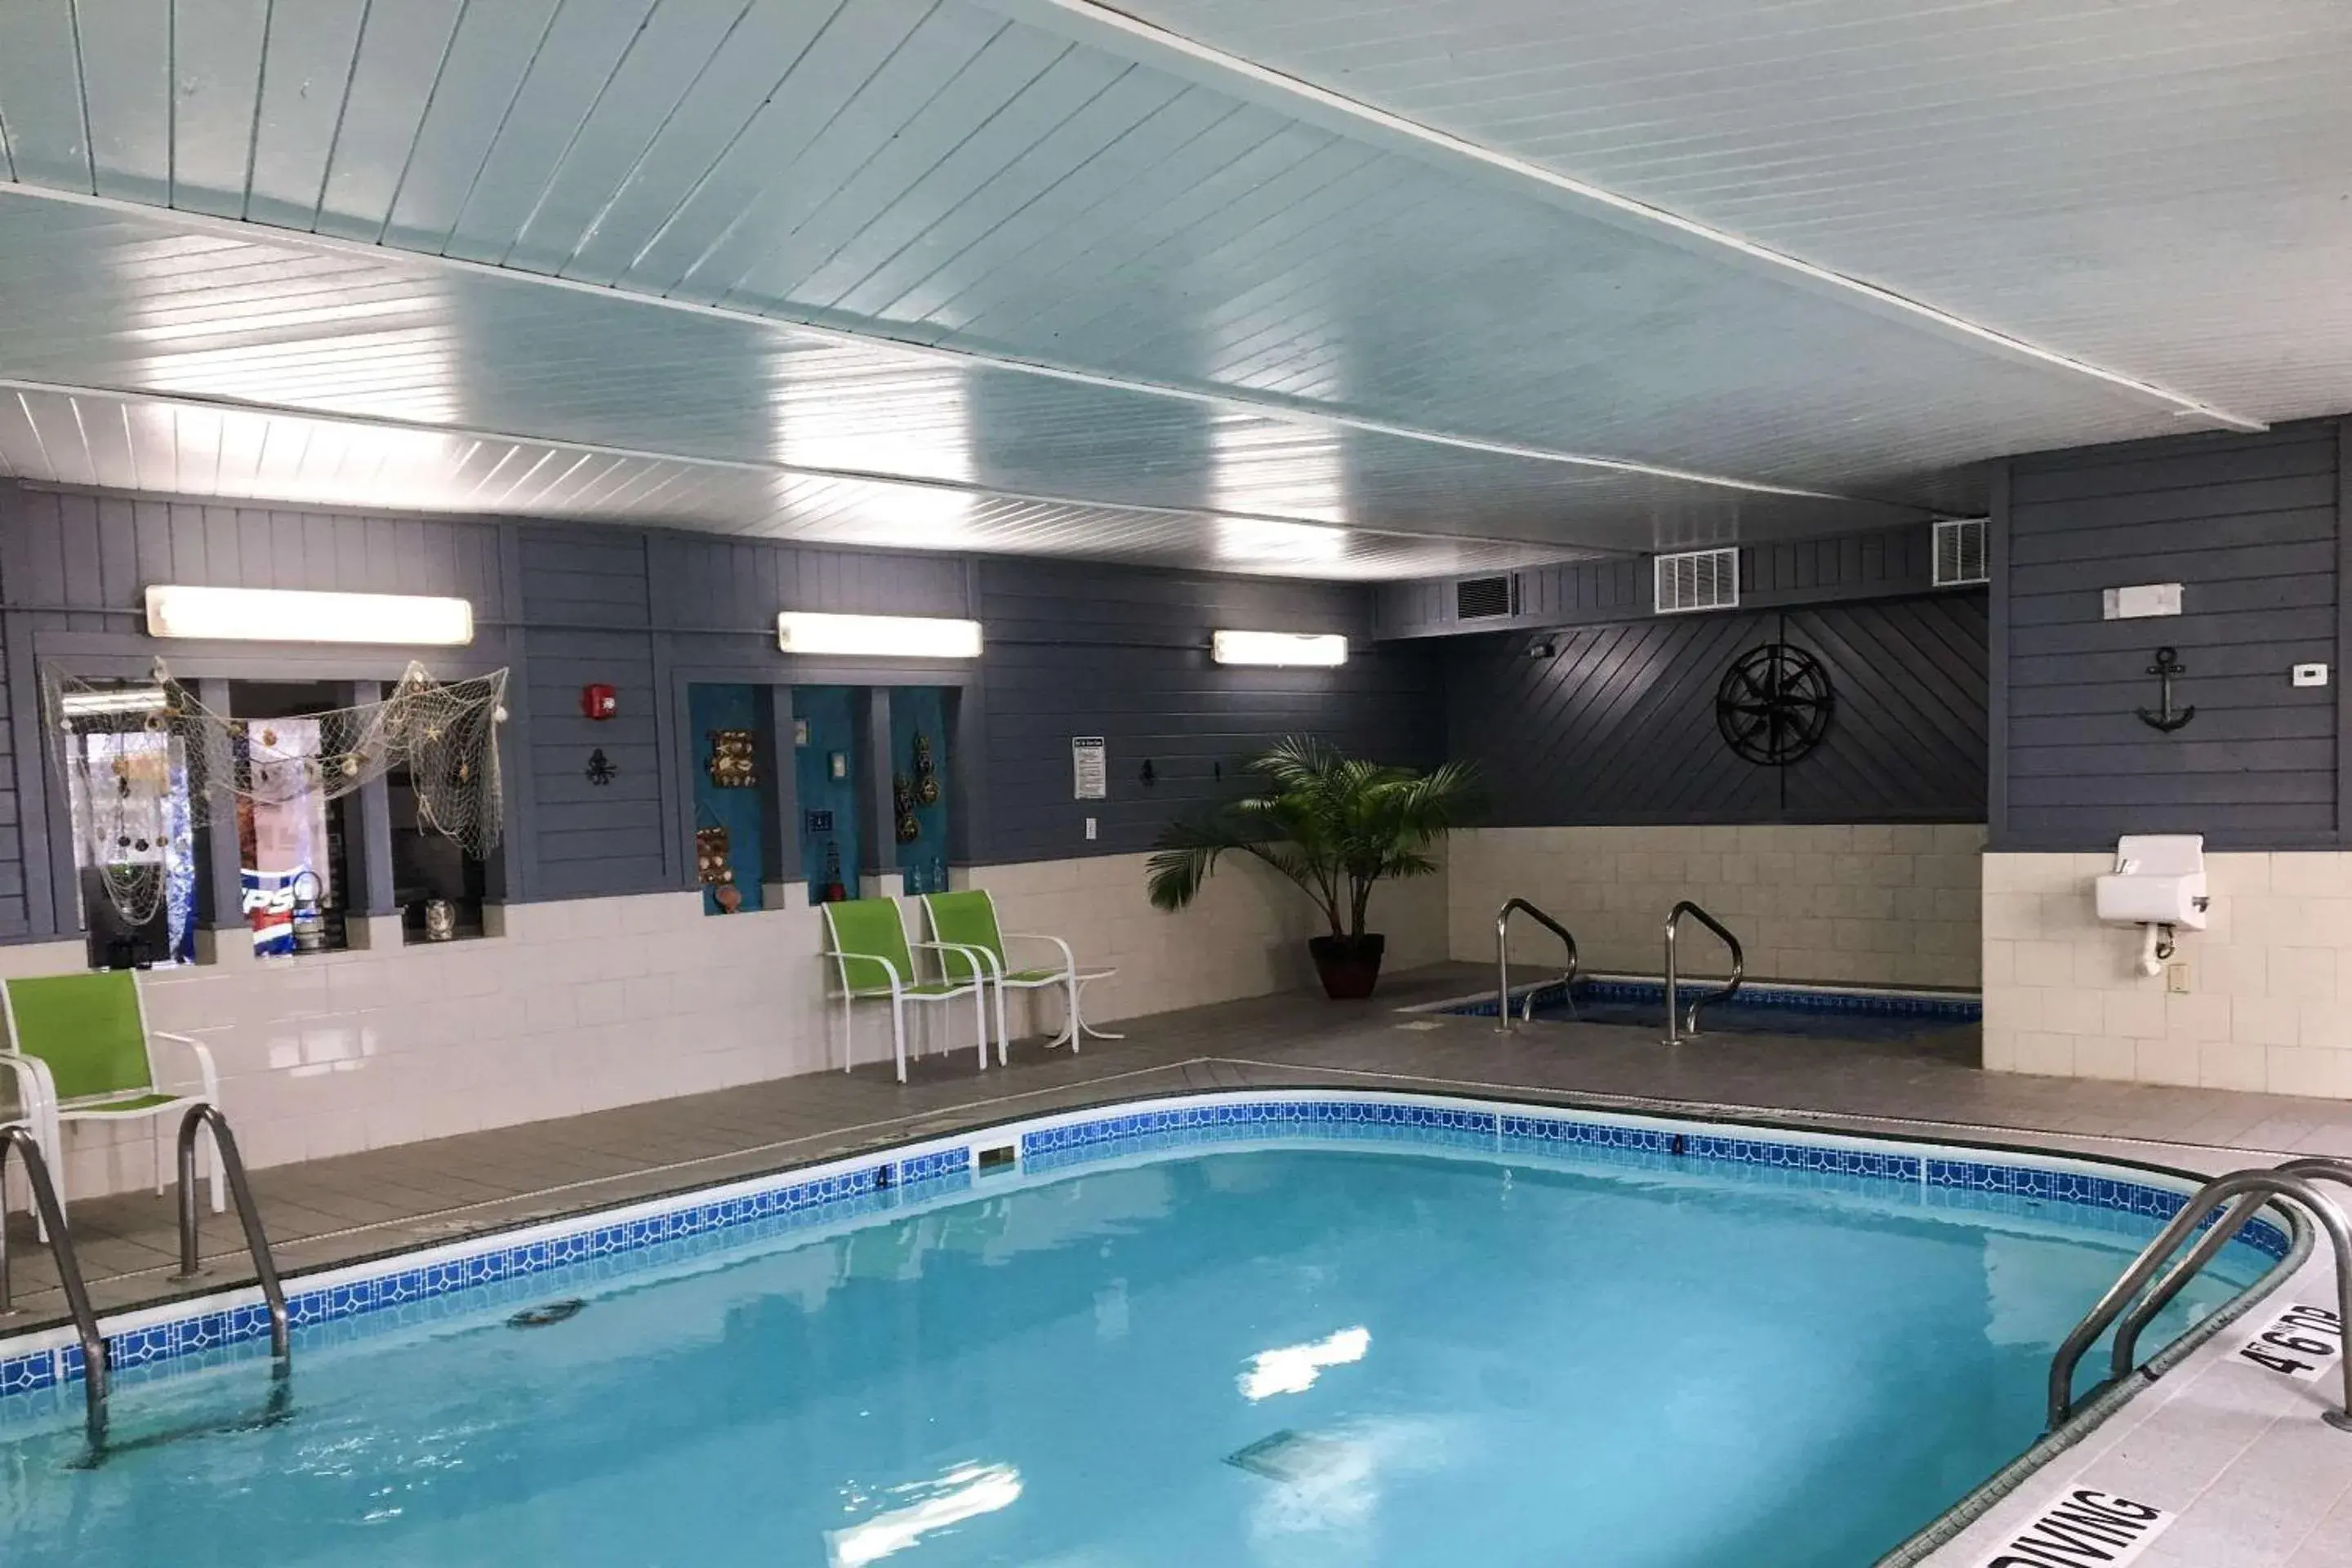 On site, Swimming Pool in Quality Inn & Suites Lincoln near I-55